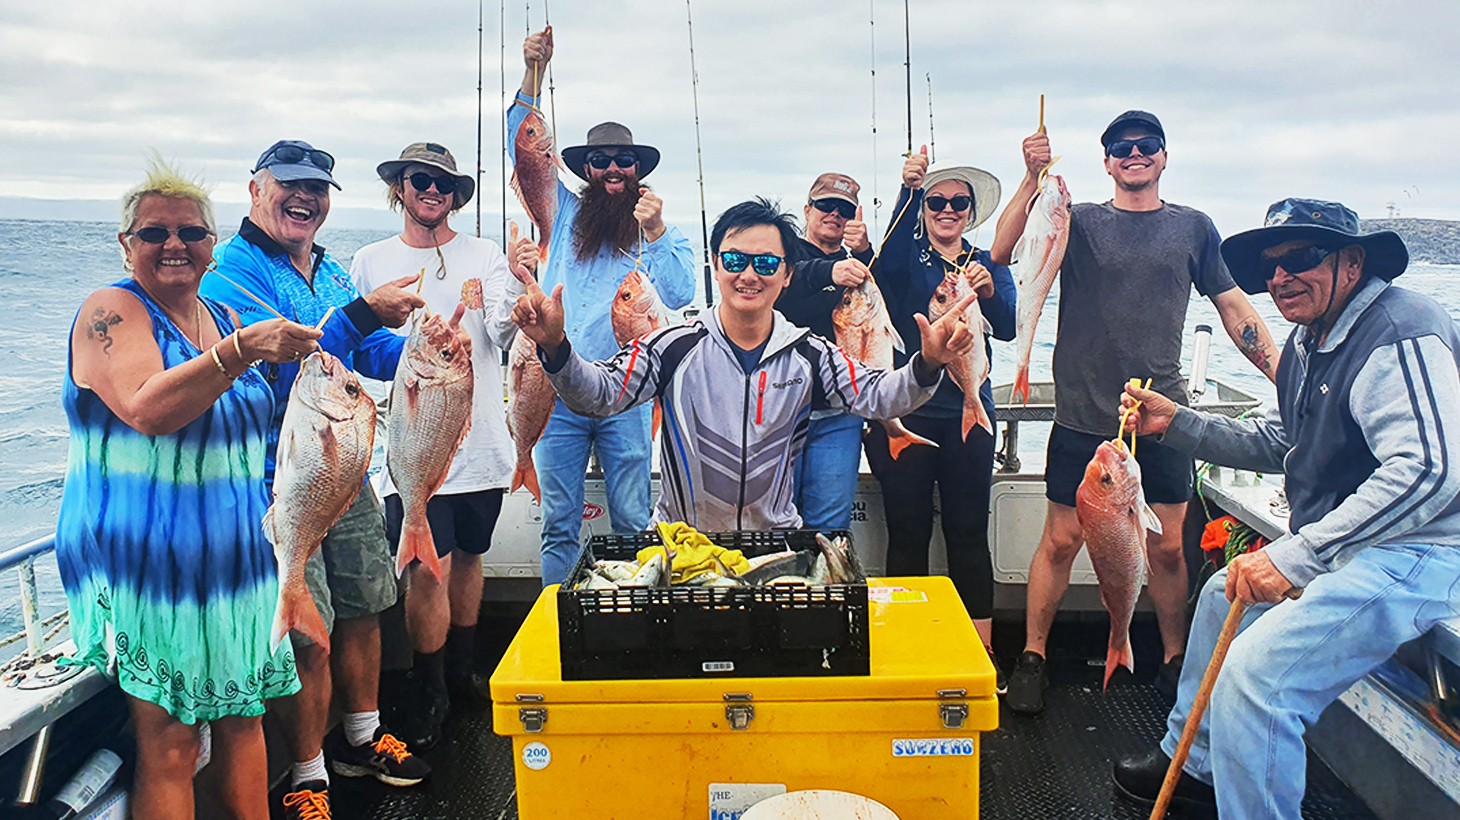 Adelaide: Four-Hour Local Fishing Charter with All Equipment for One, Two,  Five or 10 People